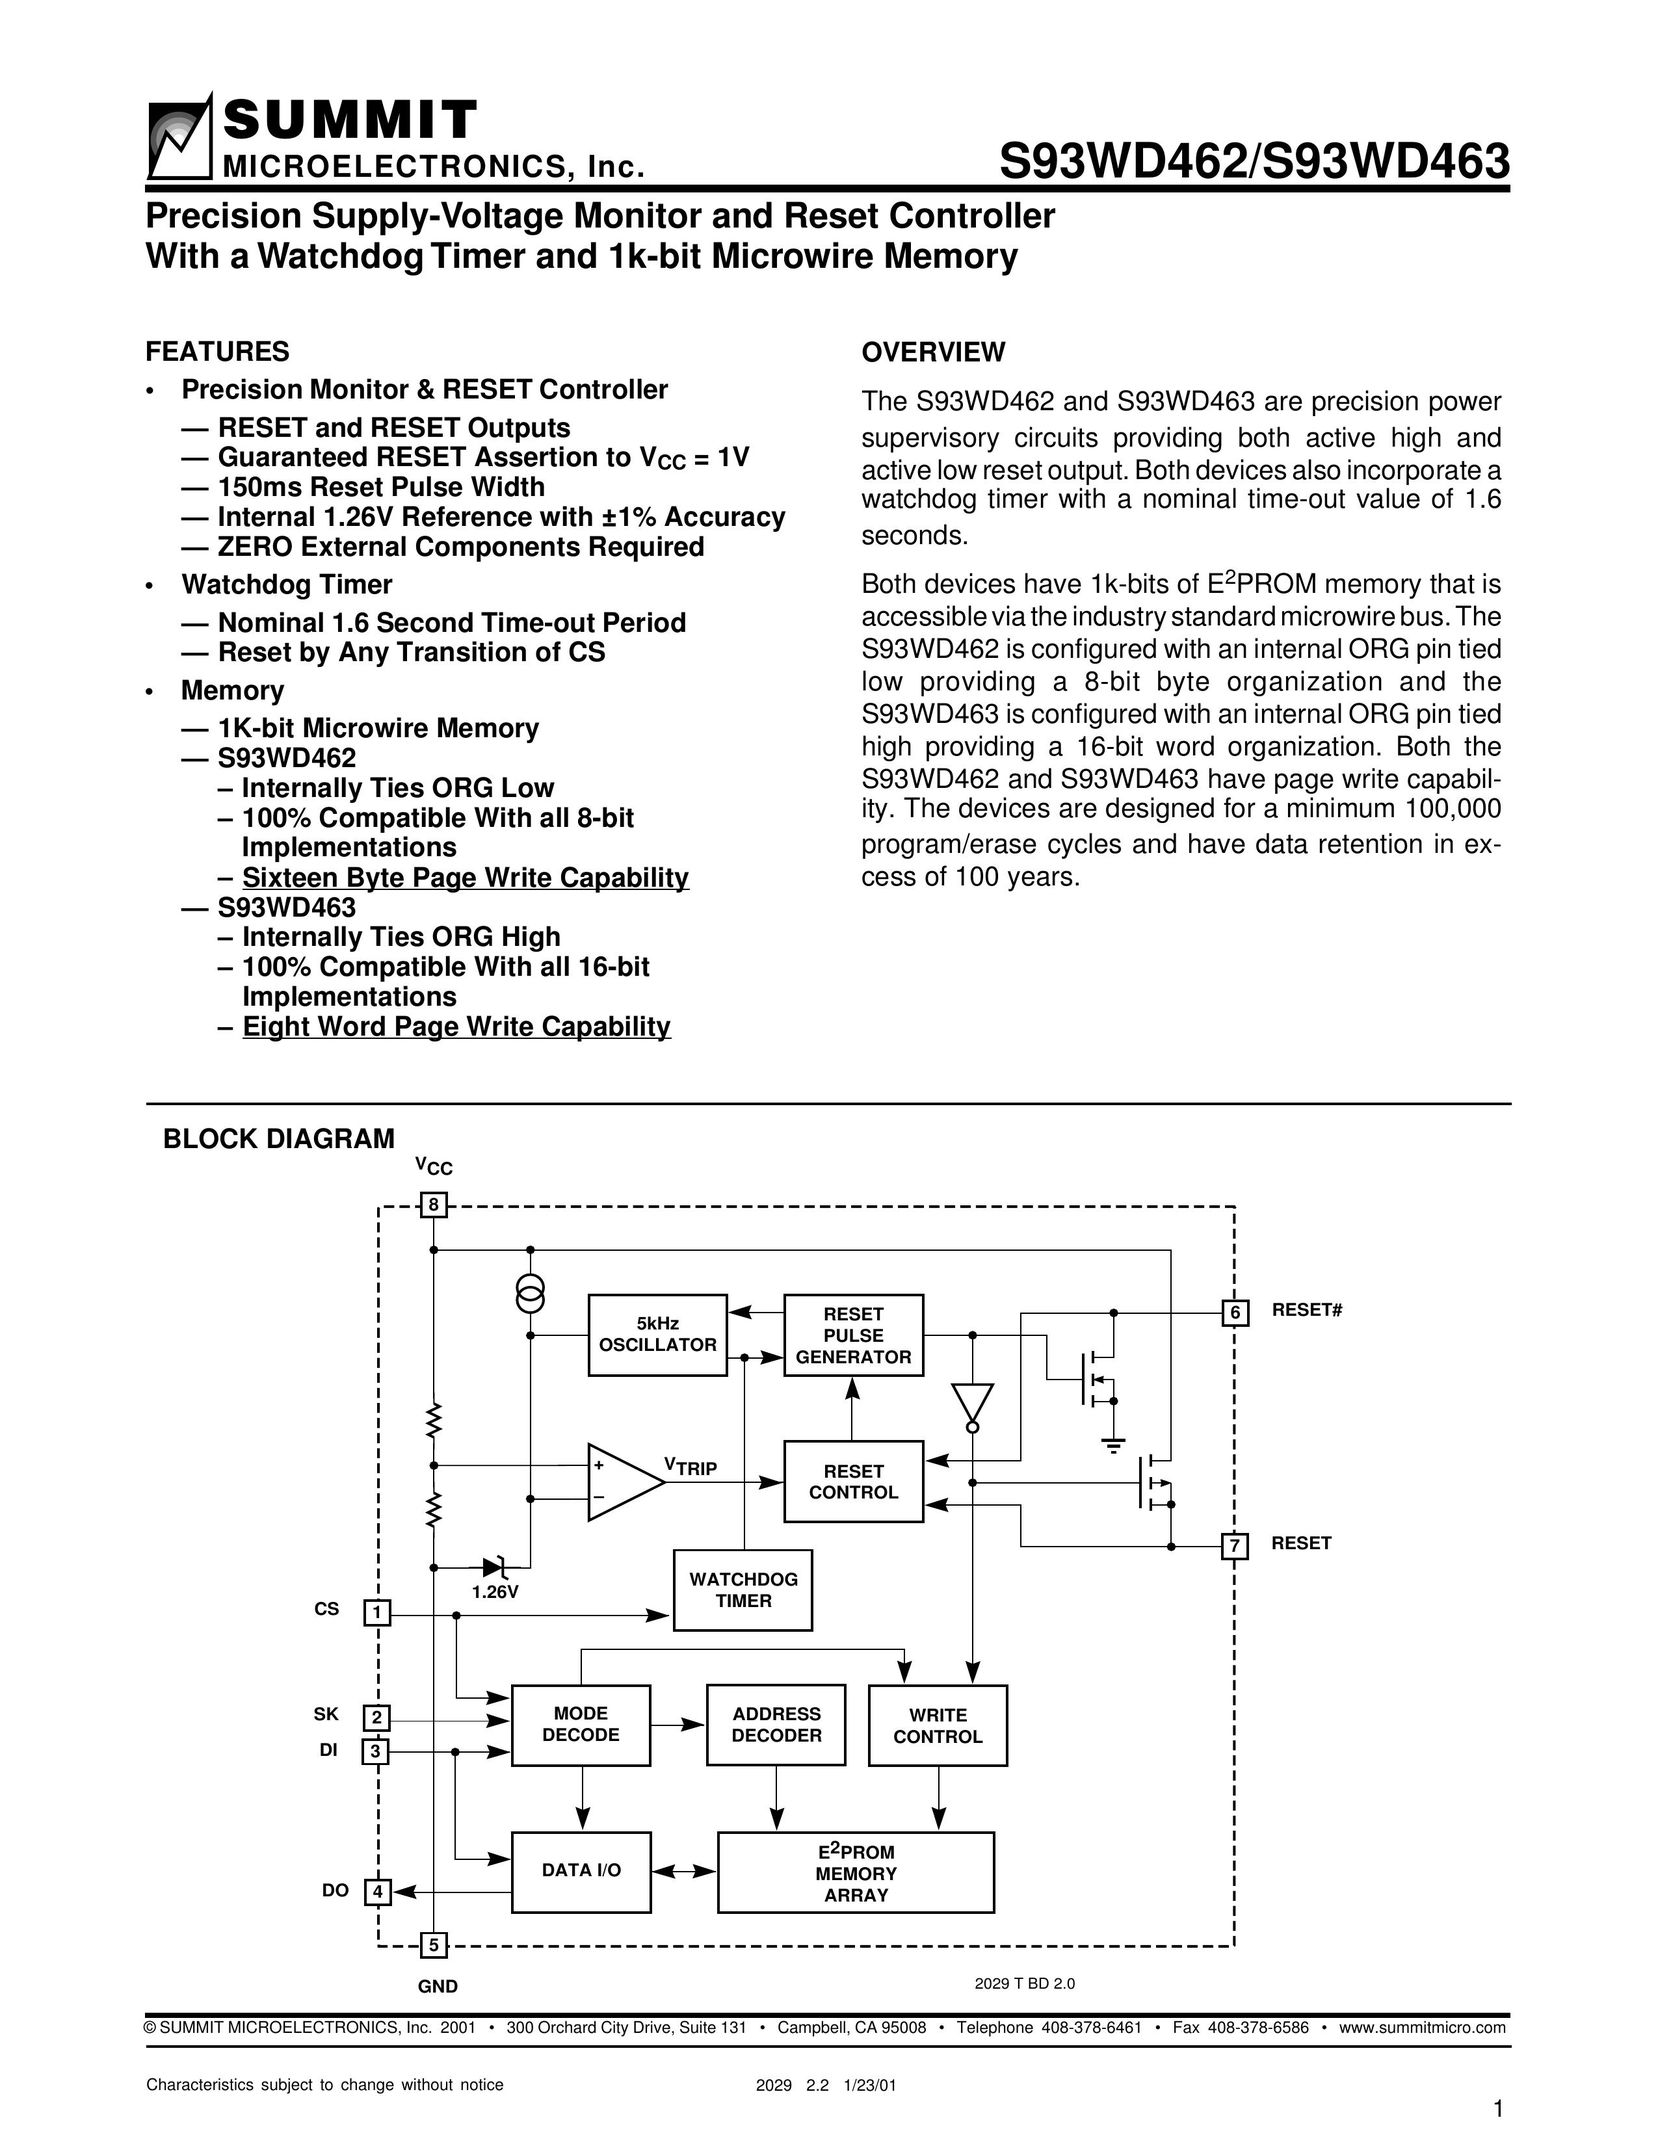 Summit S93WD463 Power Supply User Manual